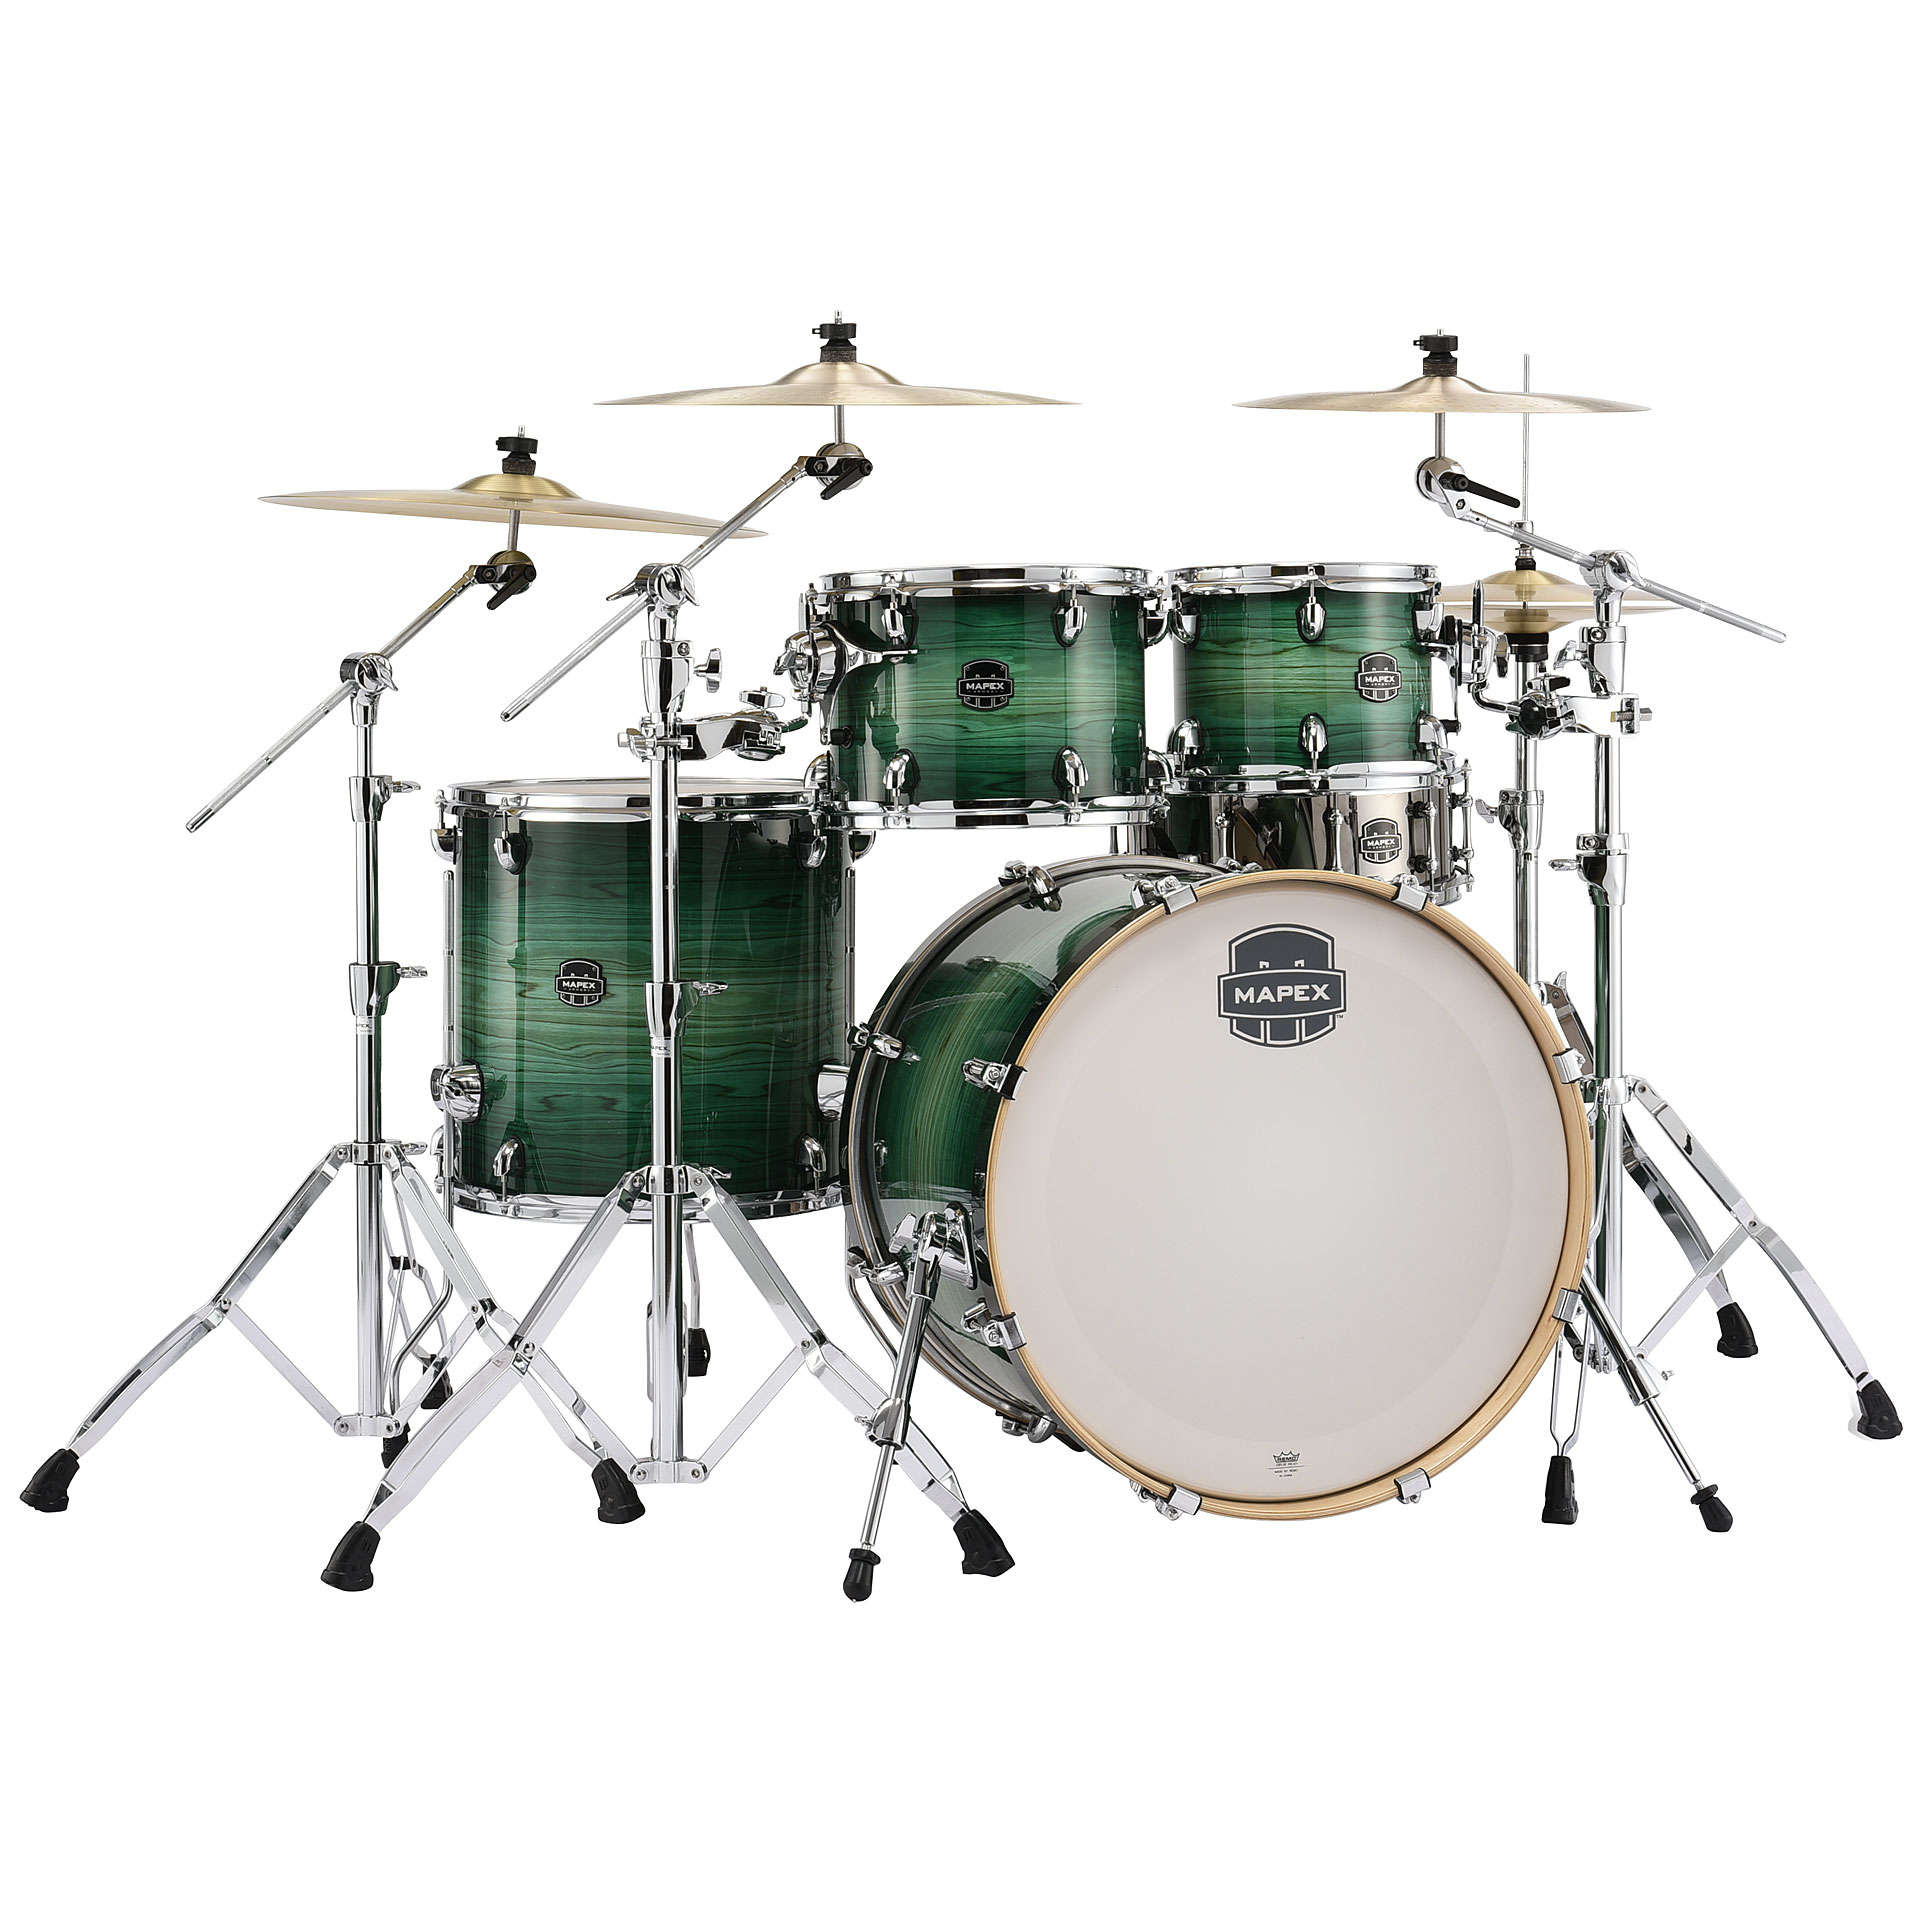 Mapex AR504SFG Armory 5-Piece Drum kit - Emerald Burst (Excluding Cymbals)